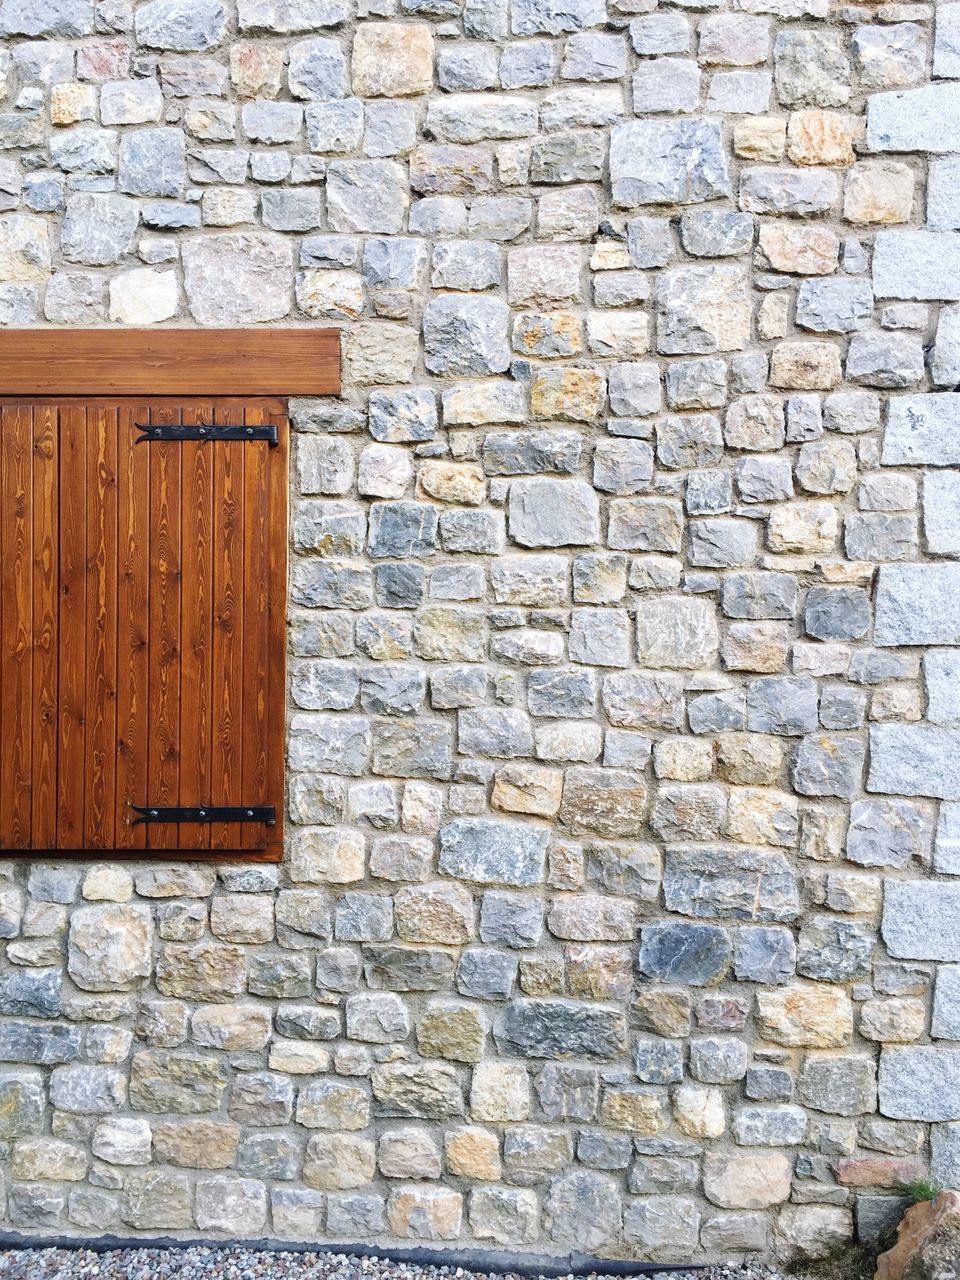 CLOSE-UP OF WOOD ON STONE WALL